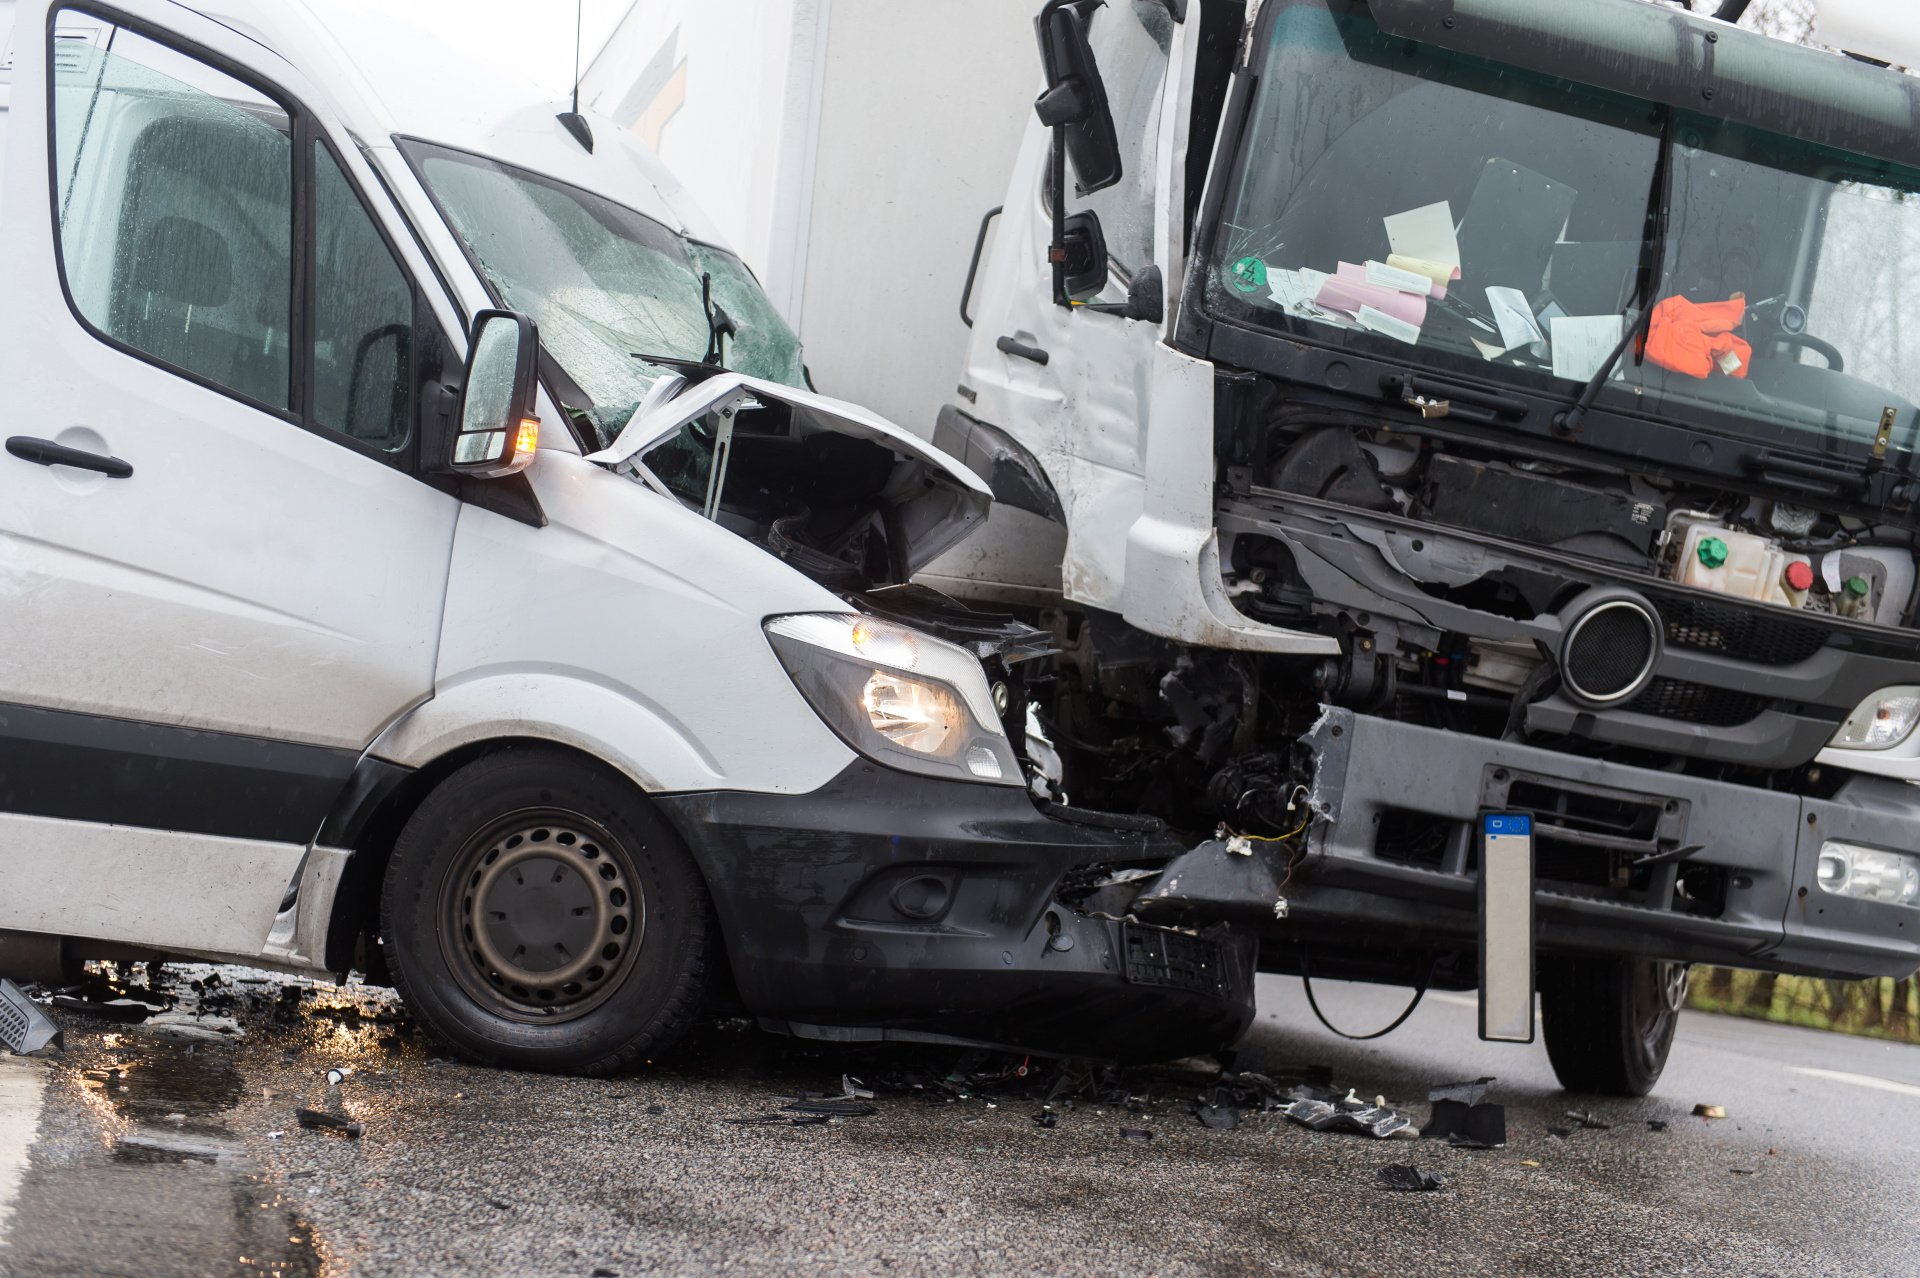 Vehicle Accident Damage Assessment, Report, Repair, Claims.